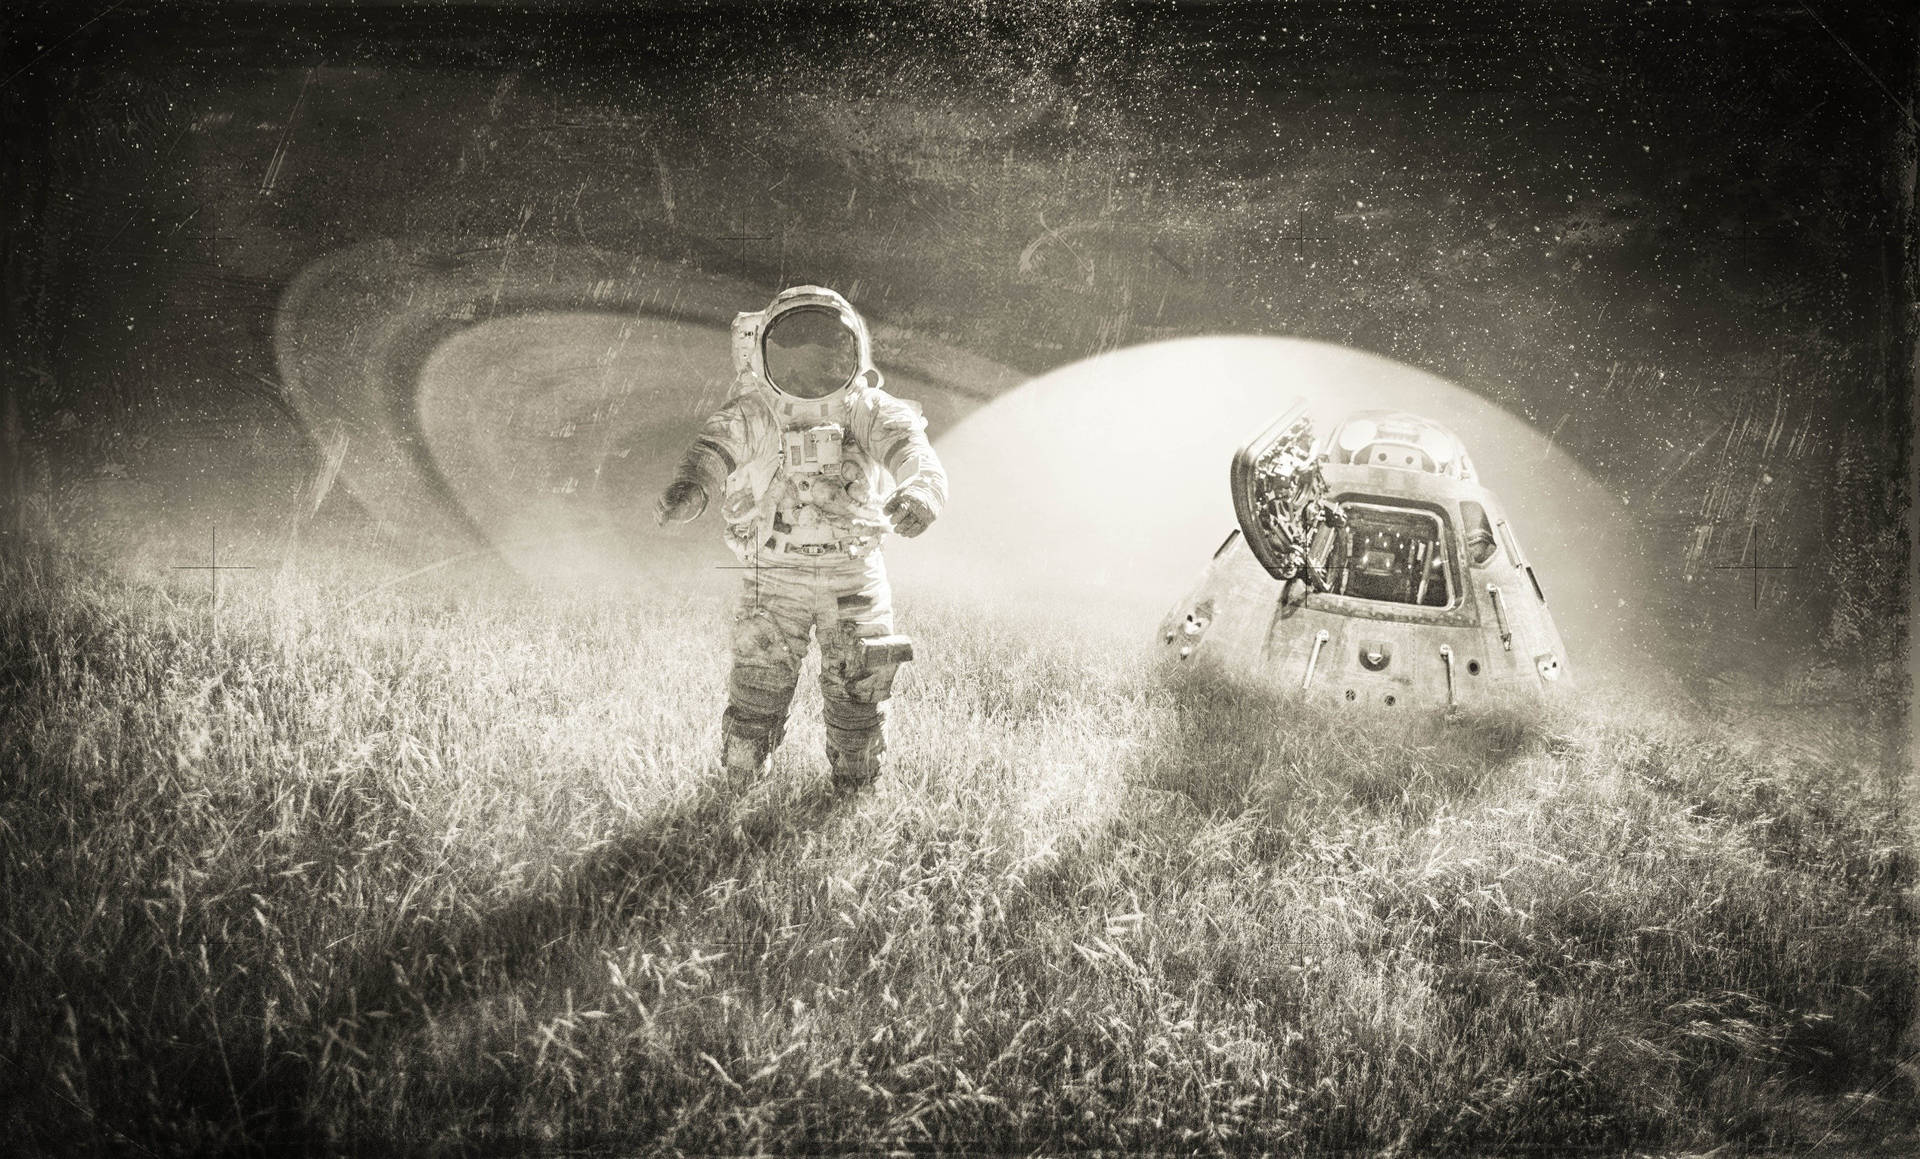 Black And White Astronaut Classic Old Photo Wallpaper